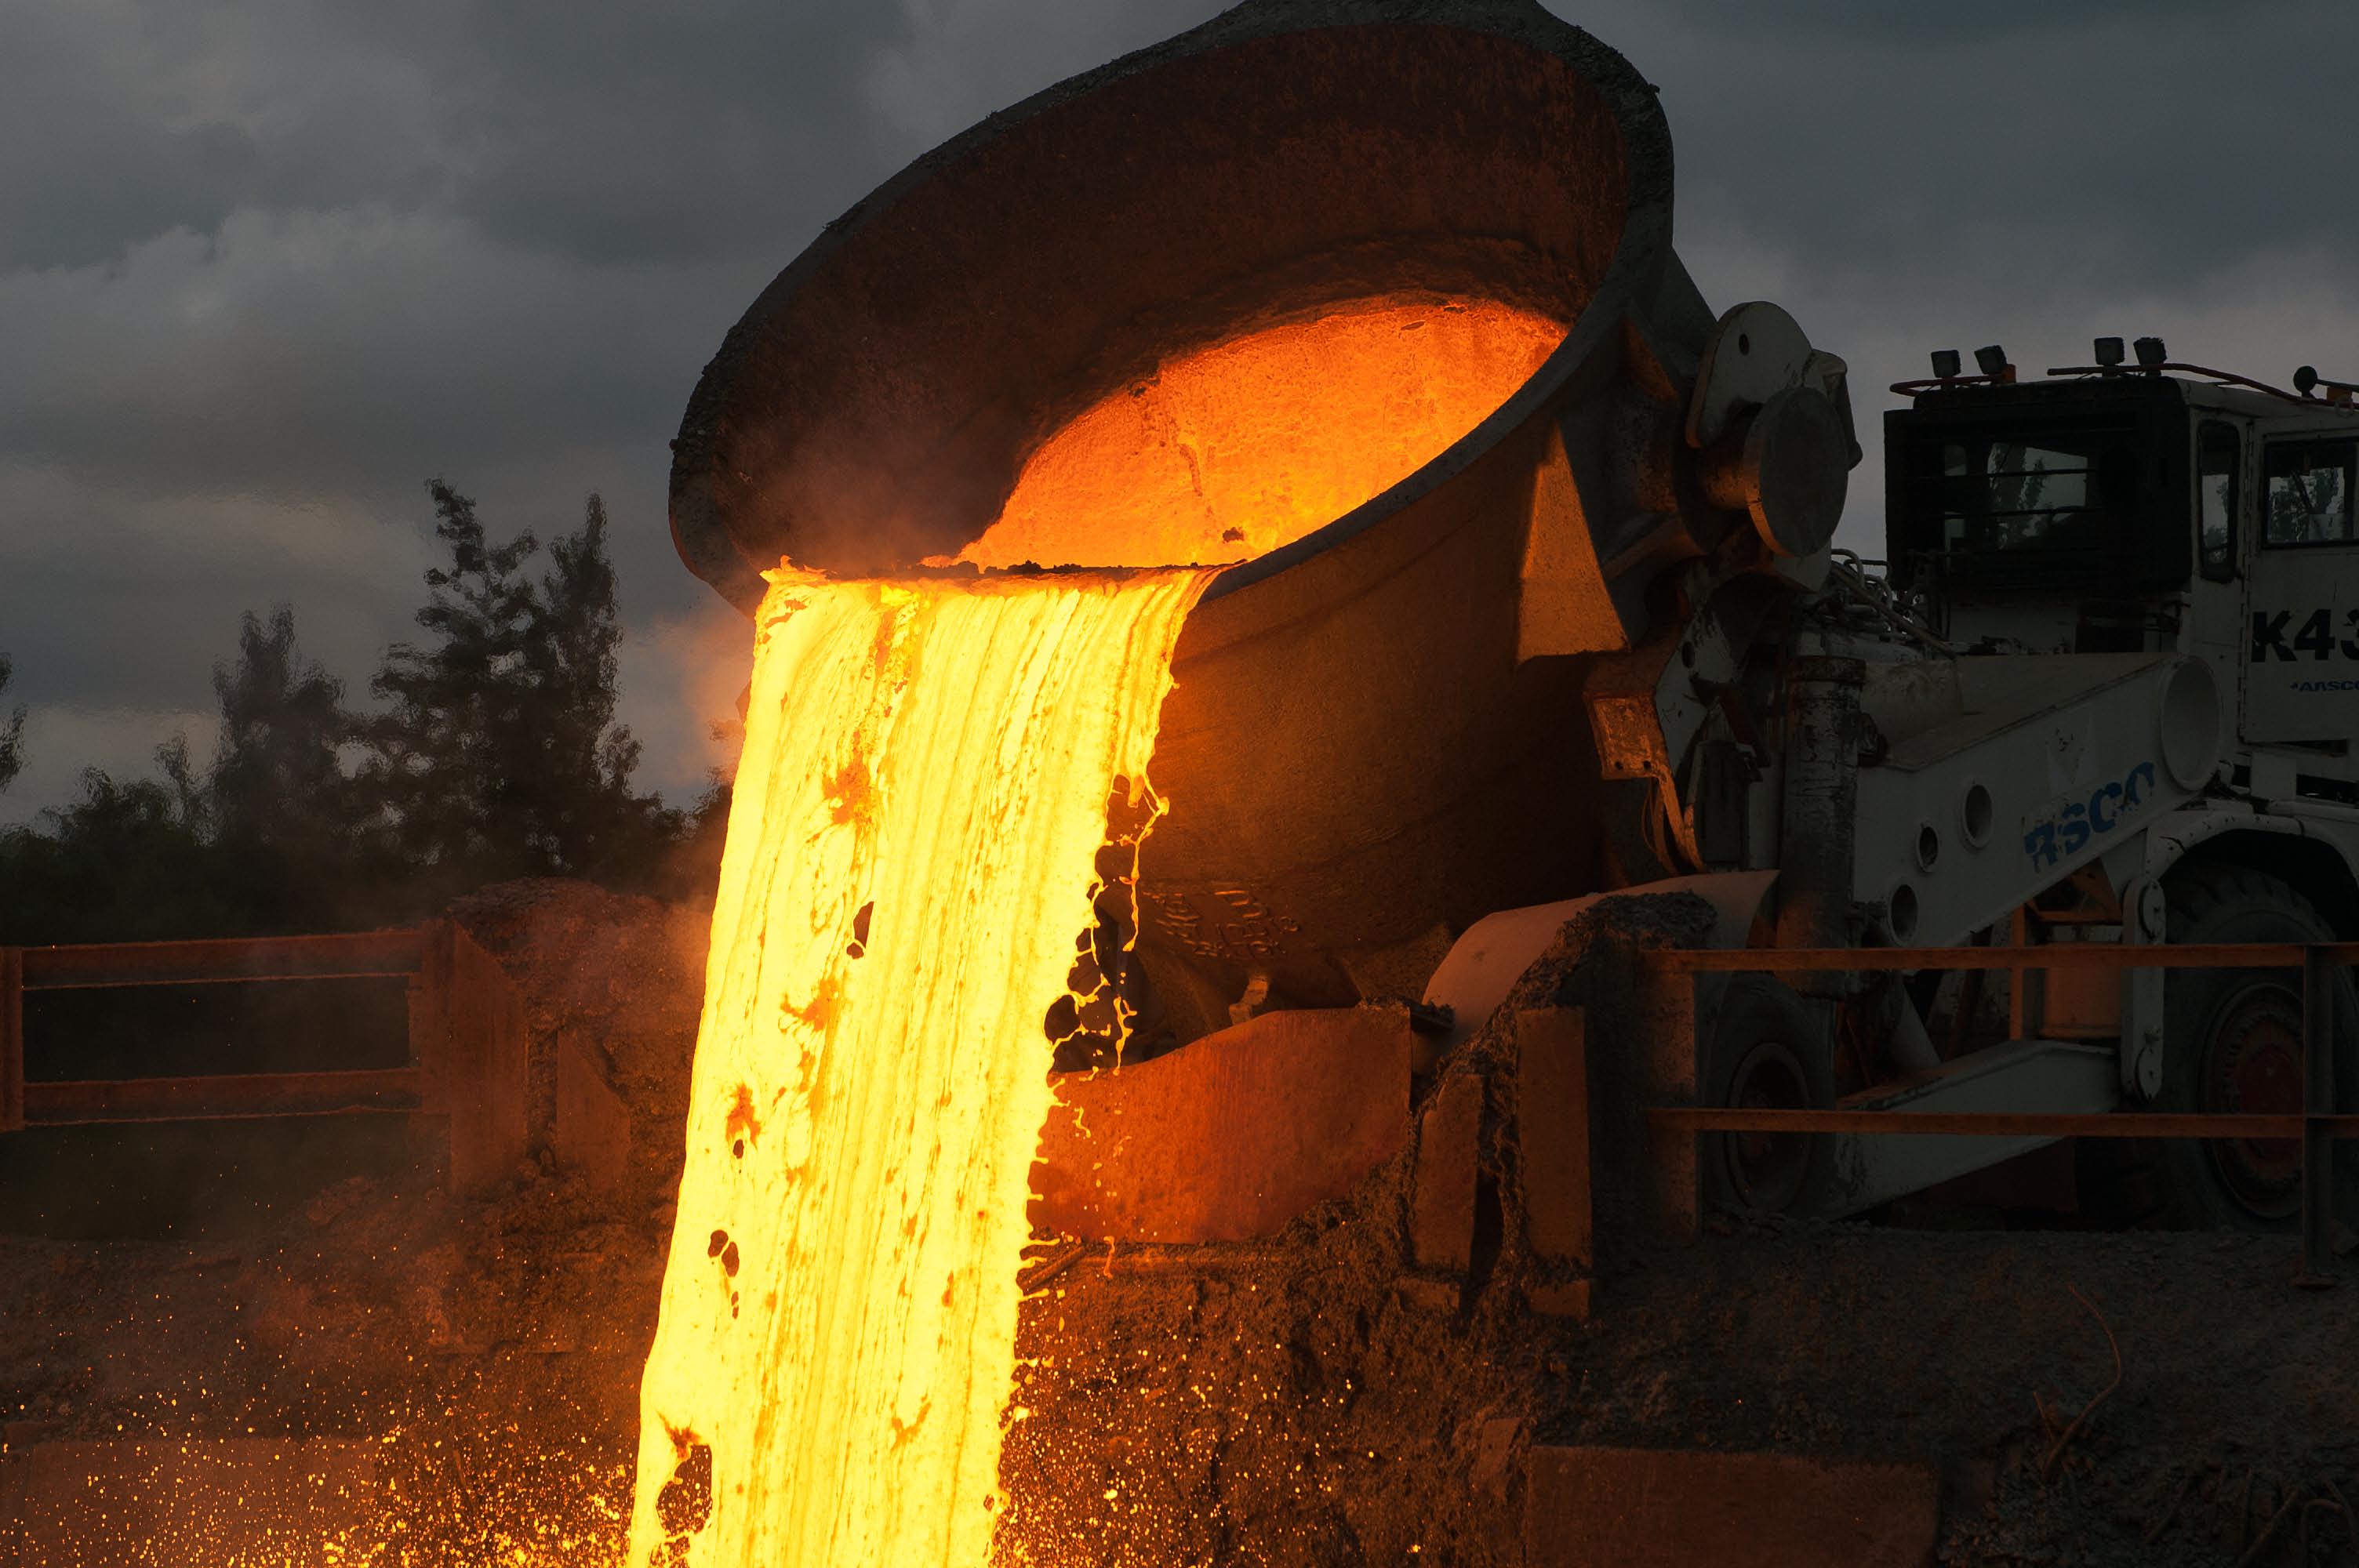 Tipping slag at Outokumpu Steelworks during Clan Line's visit